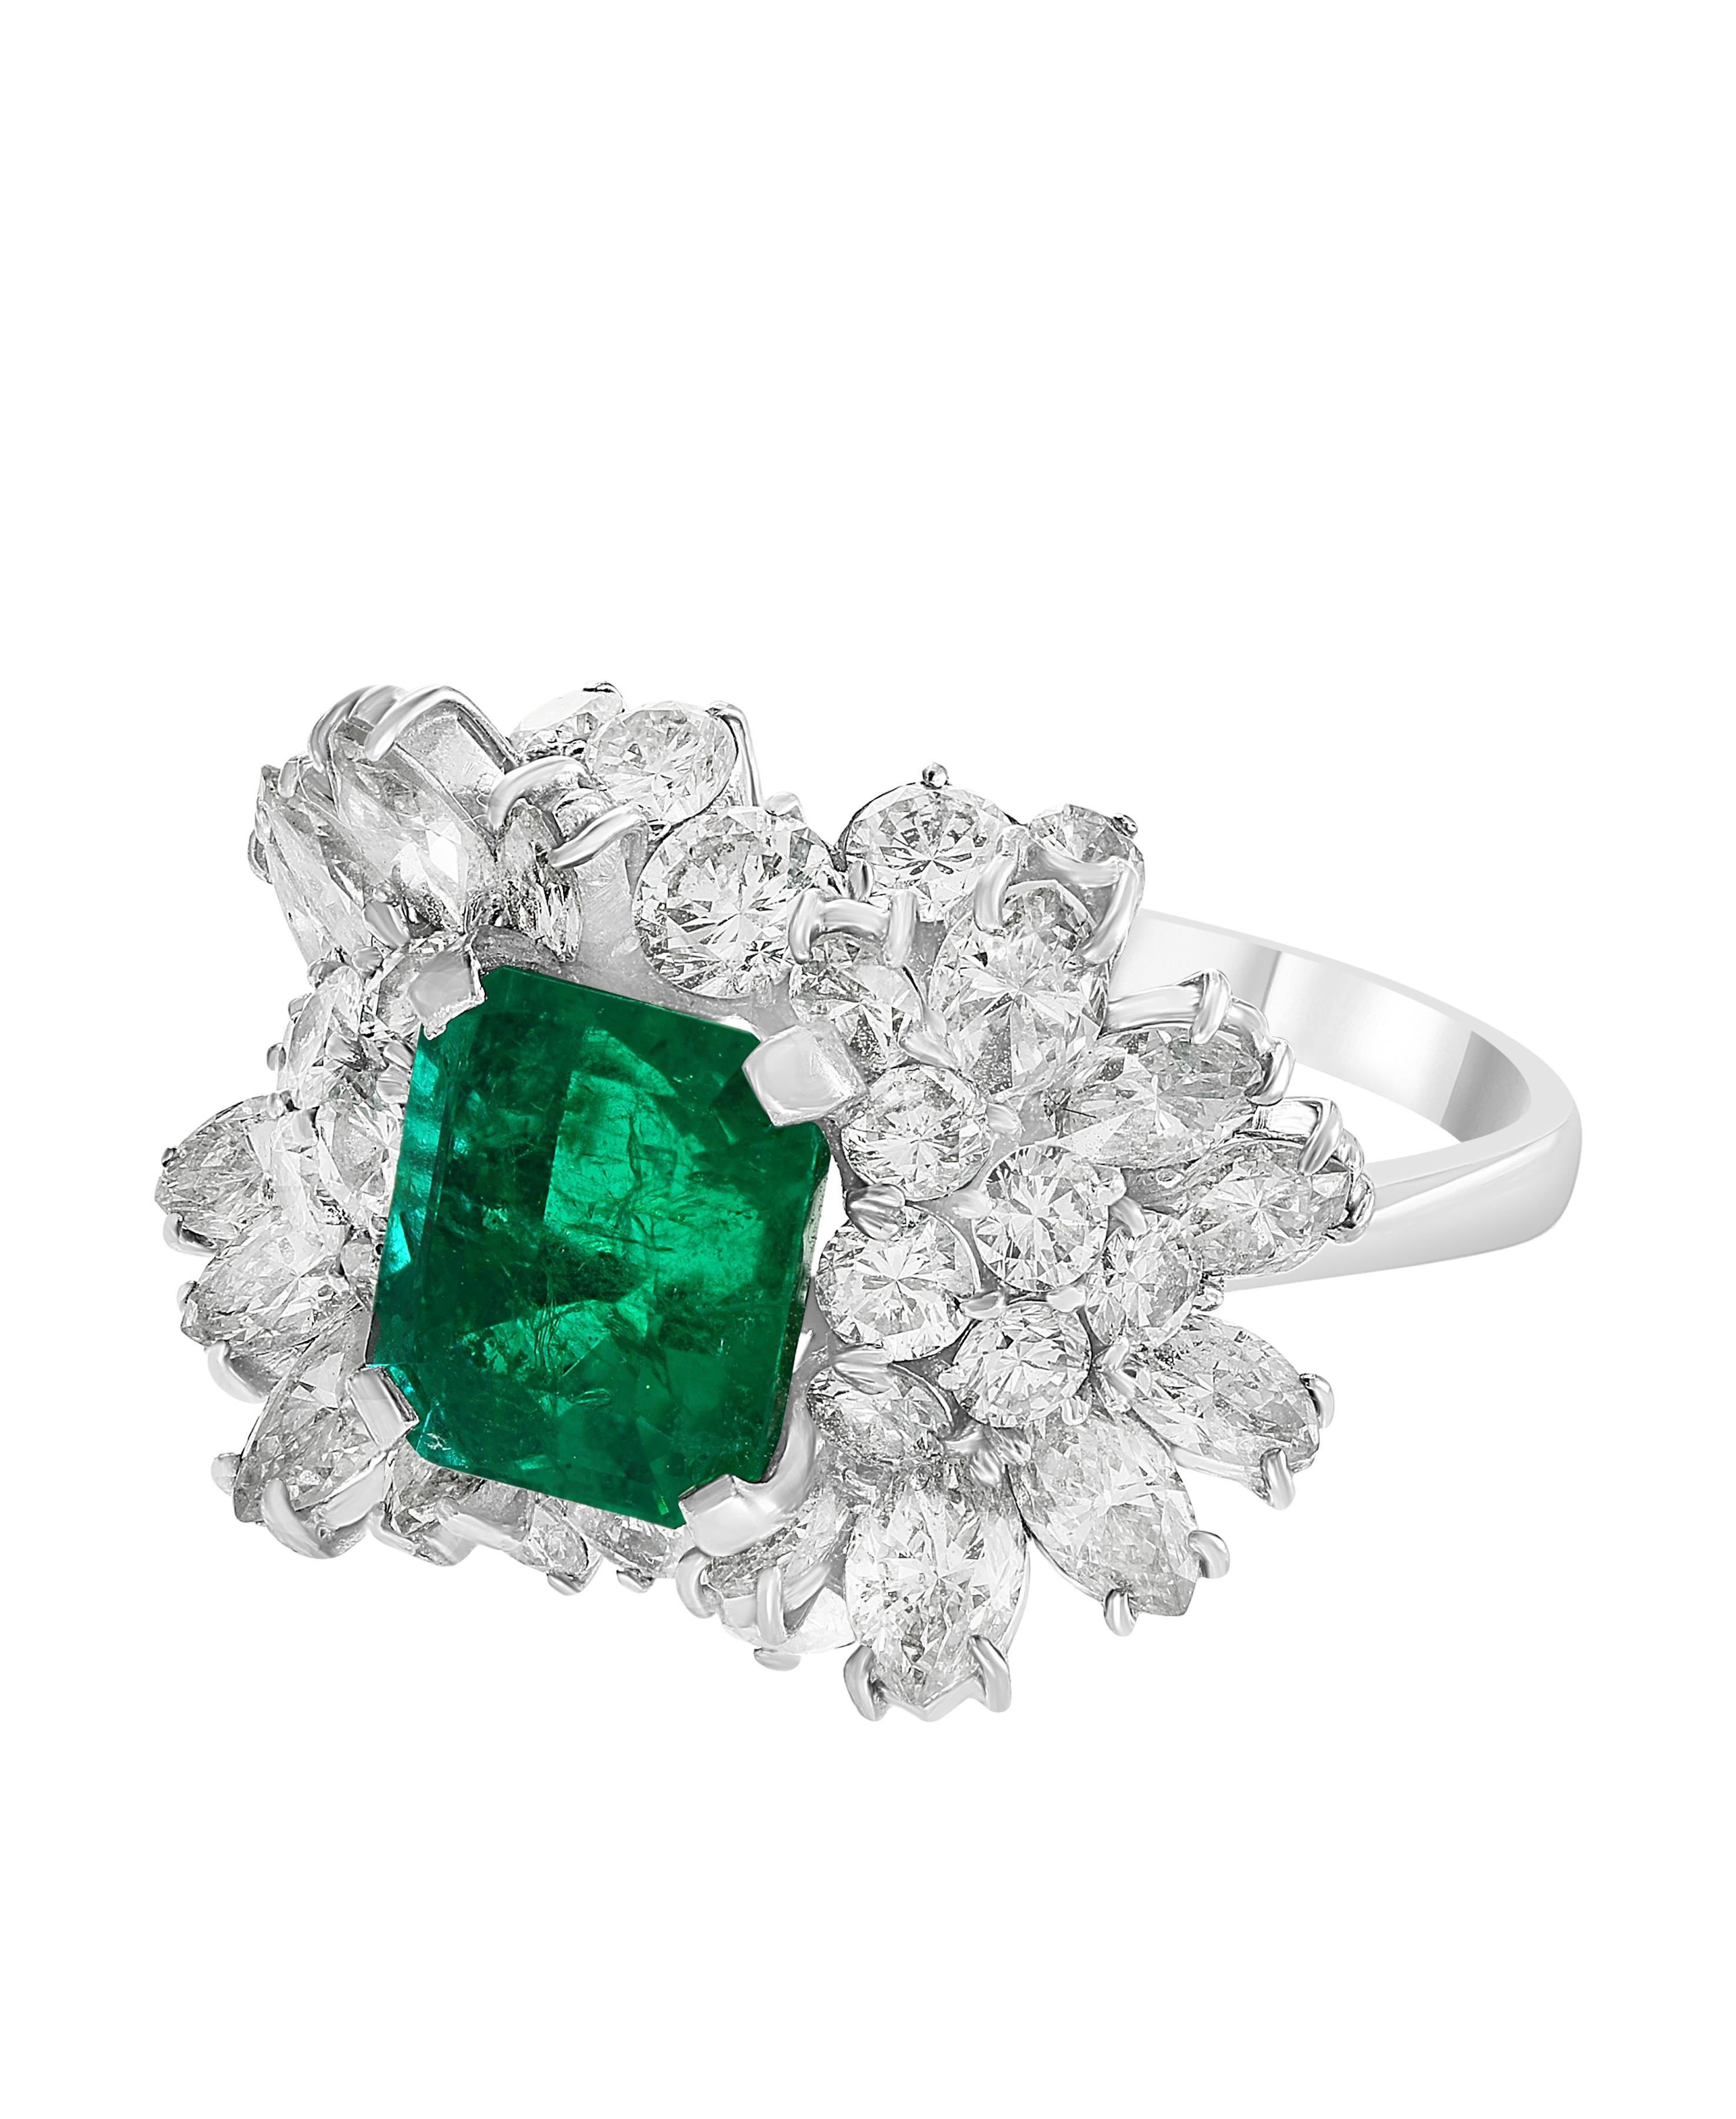 A classic, Cocktail ring 
2.5 Carat  Colombian Emerald and Diamond Ring,  with no color enhancement.
18 Karat white gold 6 gm
Ring size 6
 Diamonds: approximate 3.5 Carat 
Emerald:  approximate 2.5 Carat 
Origin : Colombia 
Color: Deep  Green,